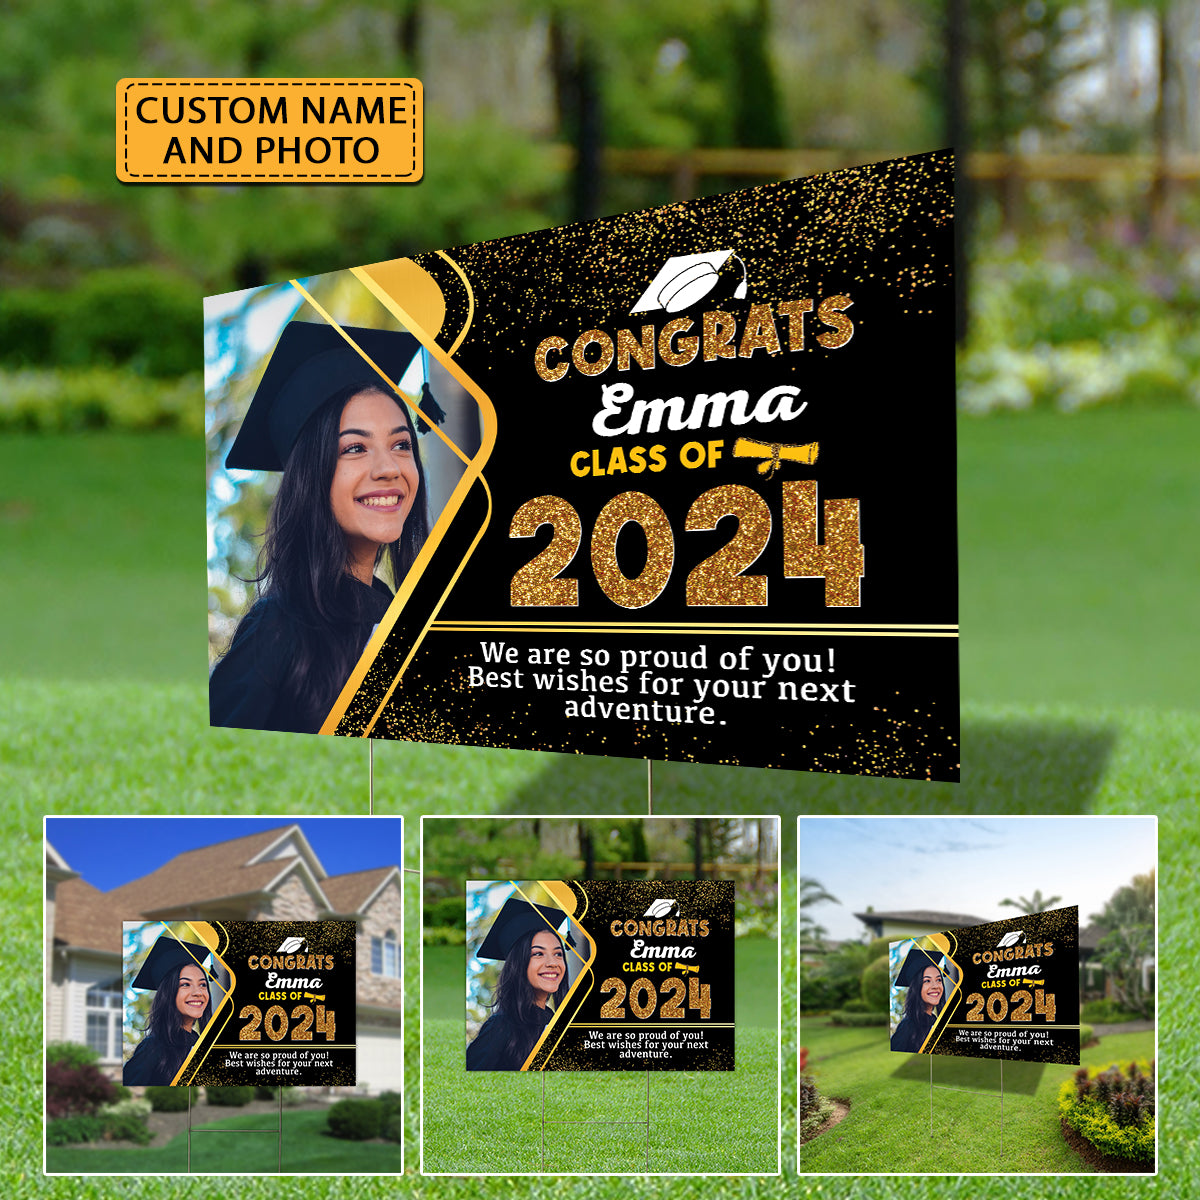 Congrats Class Of 2024, Custom Name And Photo, Personalized Lawn Sign, Yard Sign, Gift For Graduation